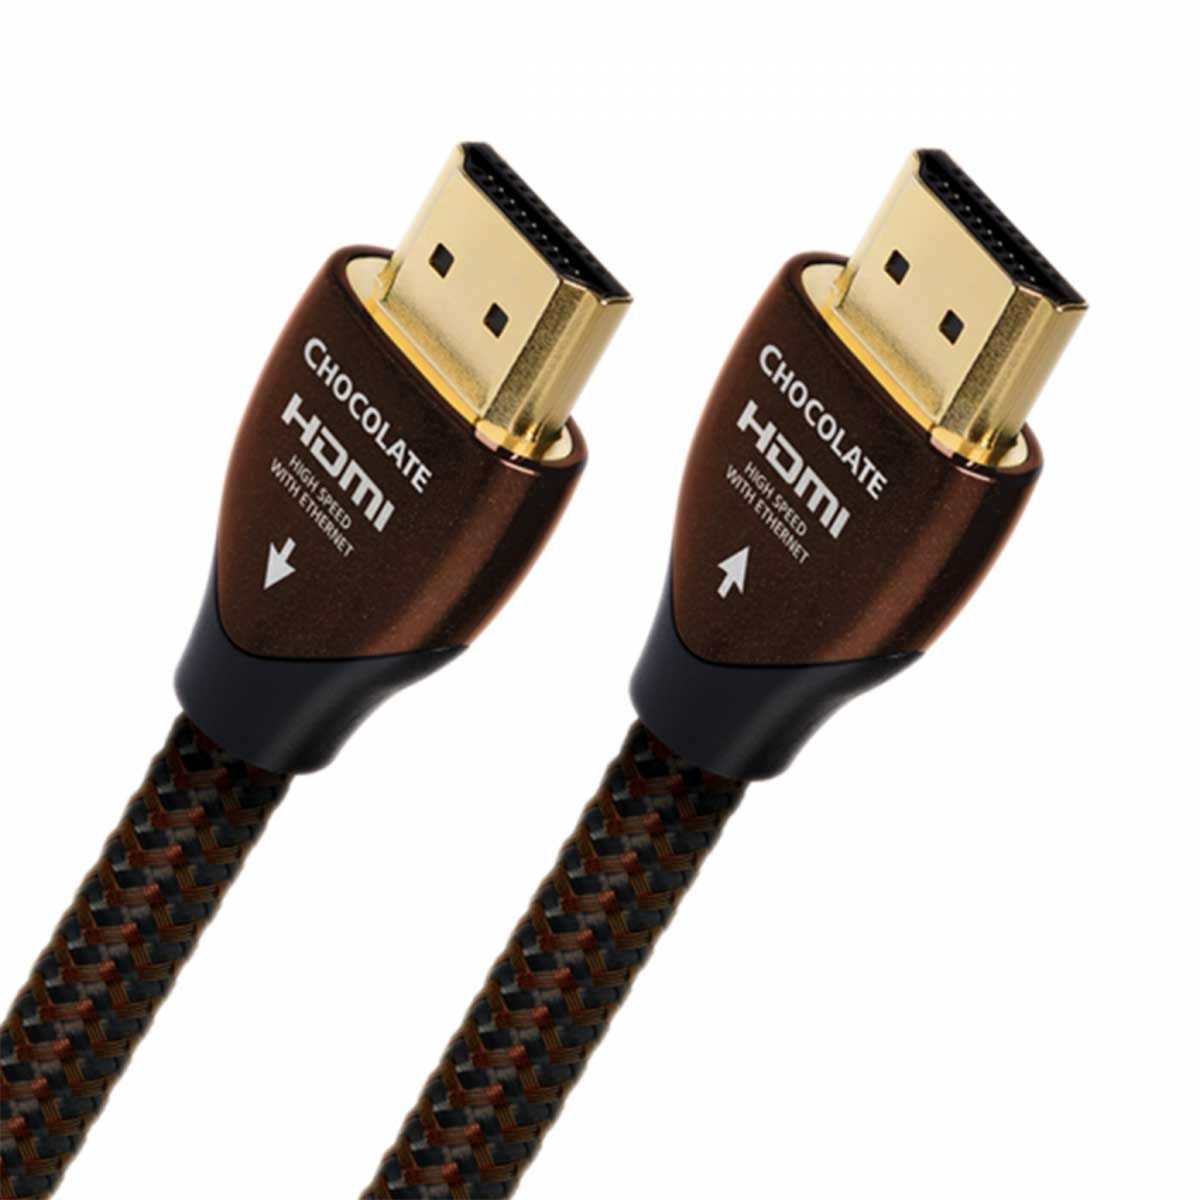 AudioQuest Chocolate High Speed HDMI Cable w/ Ethernet Connection